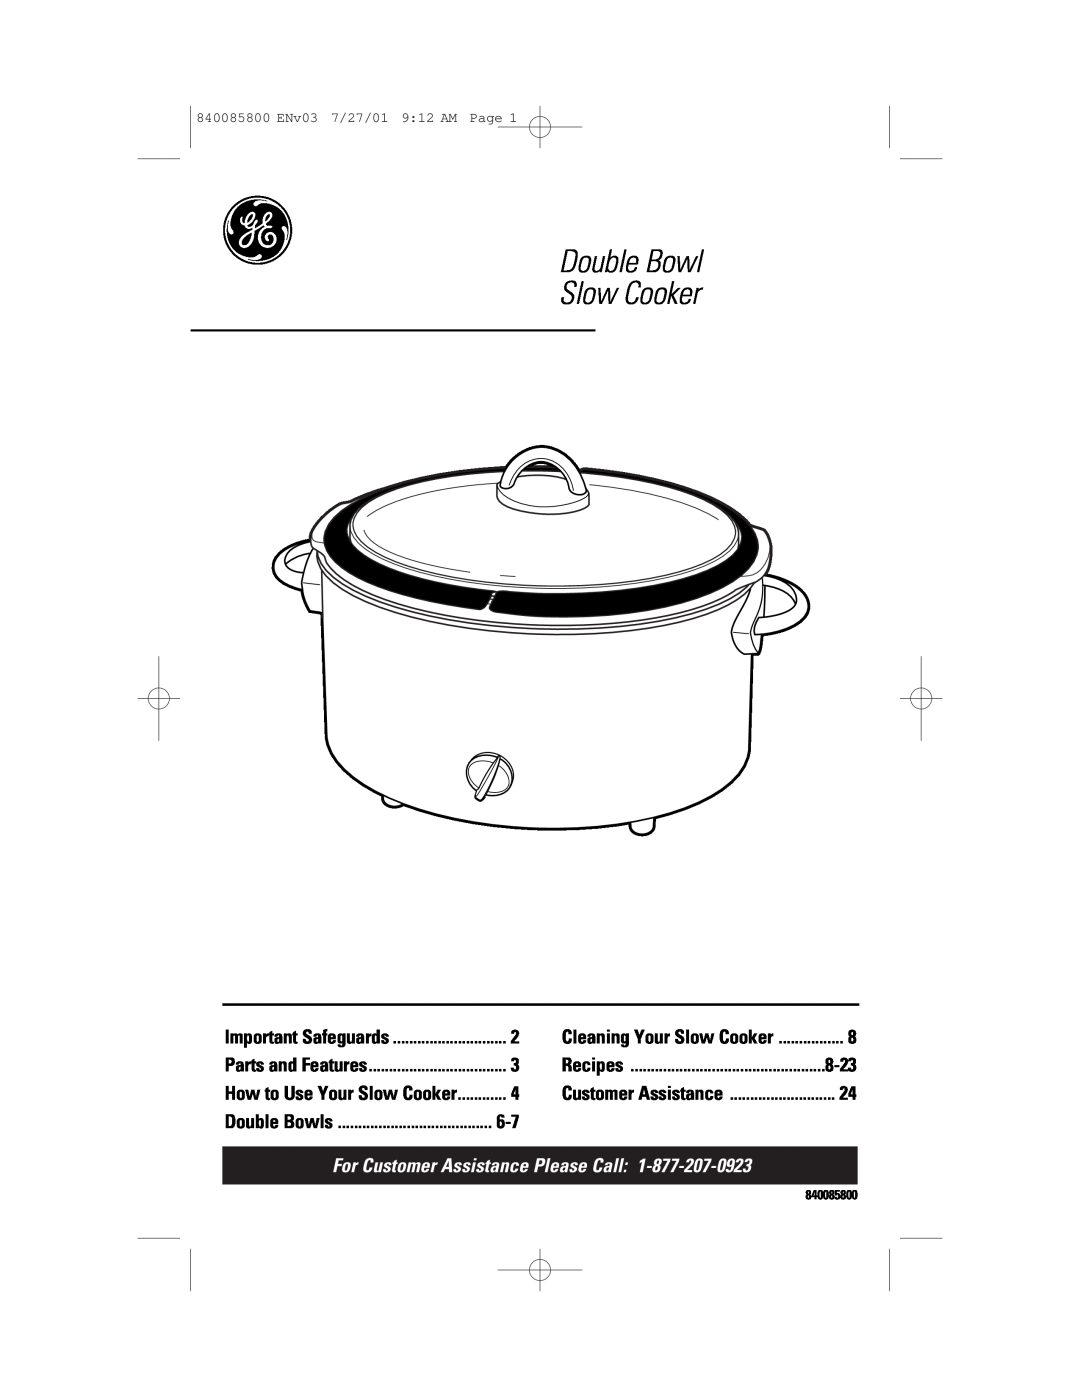 GE 840085800 manual 8-23, For Customer Assistance Please Call, Double Bowl Slow Cooker, Cleaning Your Slow Cooker, Recipes 